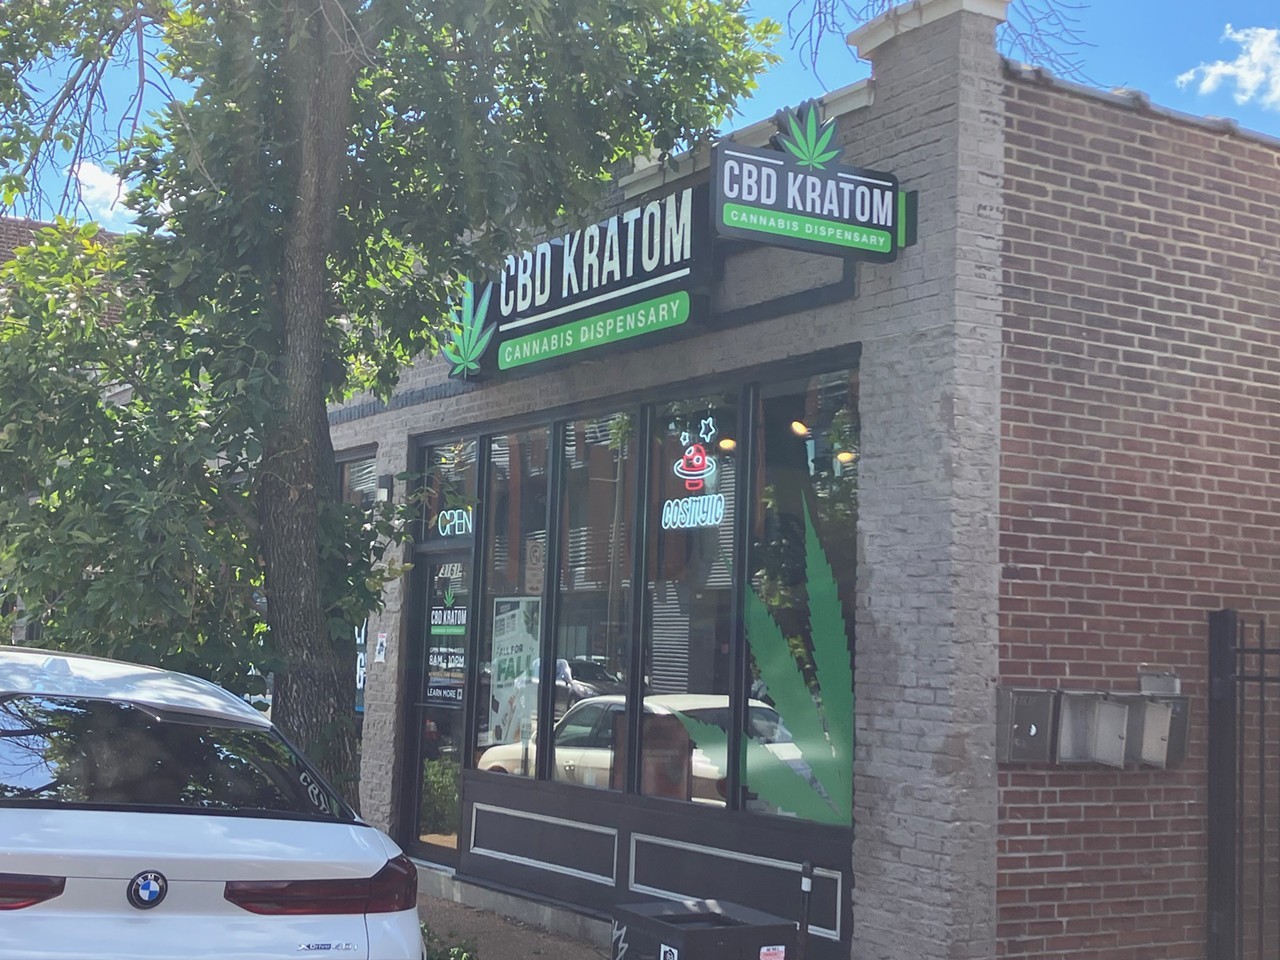 For Those Who Don't Want to Get Messed Up
CBD Kratom, multiple locations including 3161 Morgan Ford Road
St. Louis-based CBD Kratom has grown to 17 locations around the metro area as well as dispensaries in Dallas, Houston, New York, Chicago and Philadelphia. It's there for the consumer who wants cannabis' therapeutic powers &mdash; but doesn't want to get stoned. At CBD Kratom's sleek storefronts, you can choose from a wide variety of cannabinoid-derived products, including edibles, beverages, cartridges, tinctures, capsules and powders. In other words, it's a lot like a dispensary, only a whole lot less intimidating for those who have to actually be functional after consuming. Many CBD users swear it reduces anxiety, helps with pain and can even help lift depression, and the helpful staff members are happy to guide you toward a product designed to help your unique combination of needs. See shopcbdkratom.com for details.